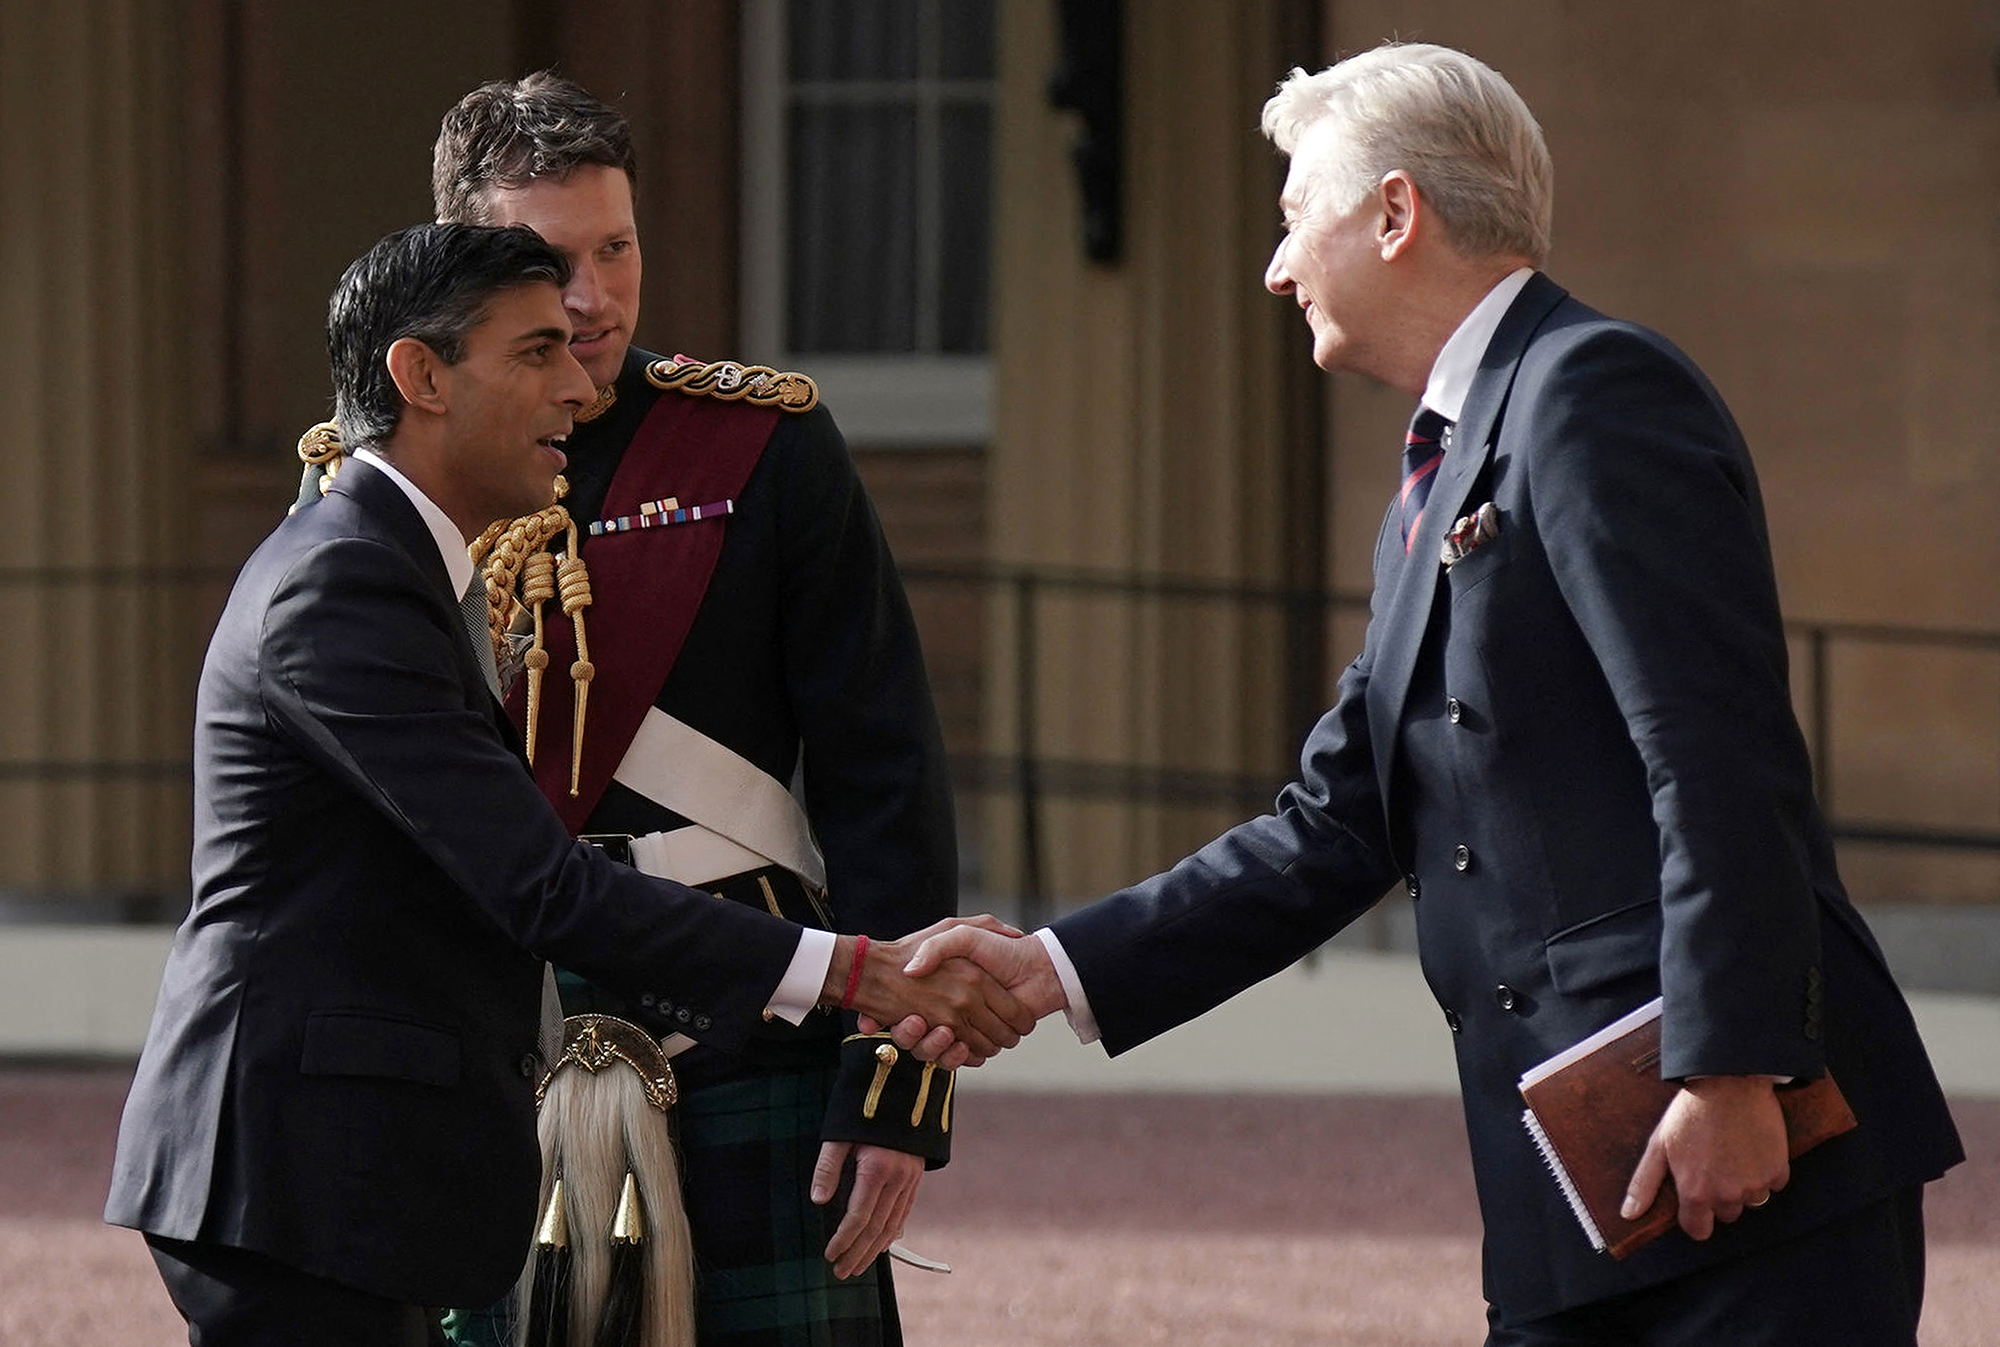 New Conservative Party leader and incoming prime minister Rishi Sunak arrives at Buckingham Palace in London on Tuesday for his audience with the King.